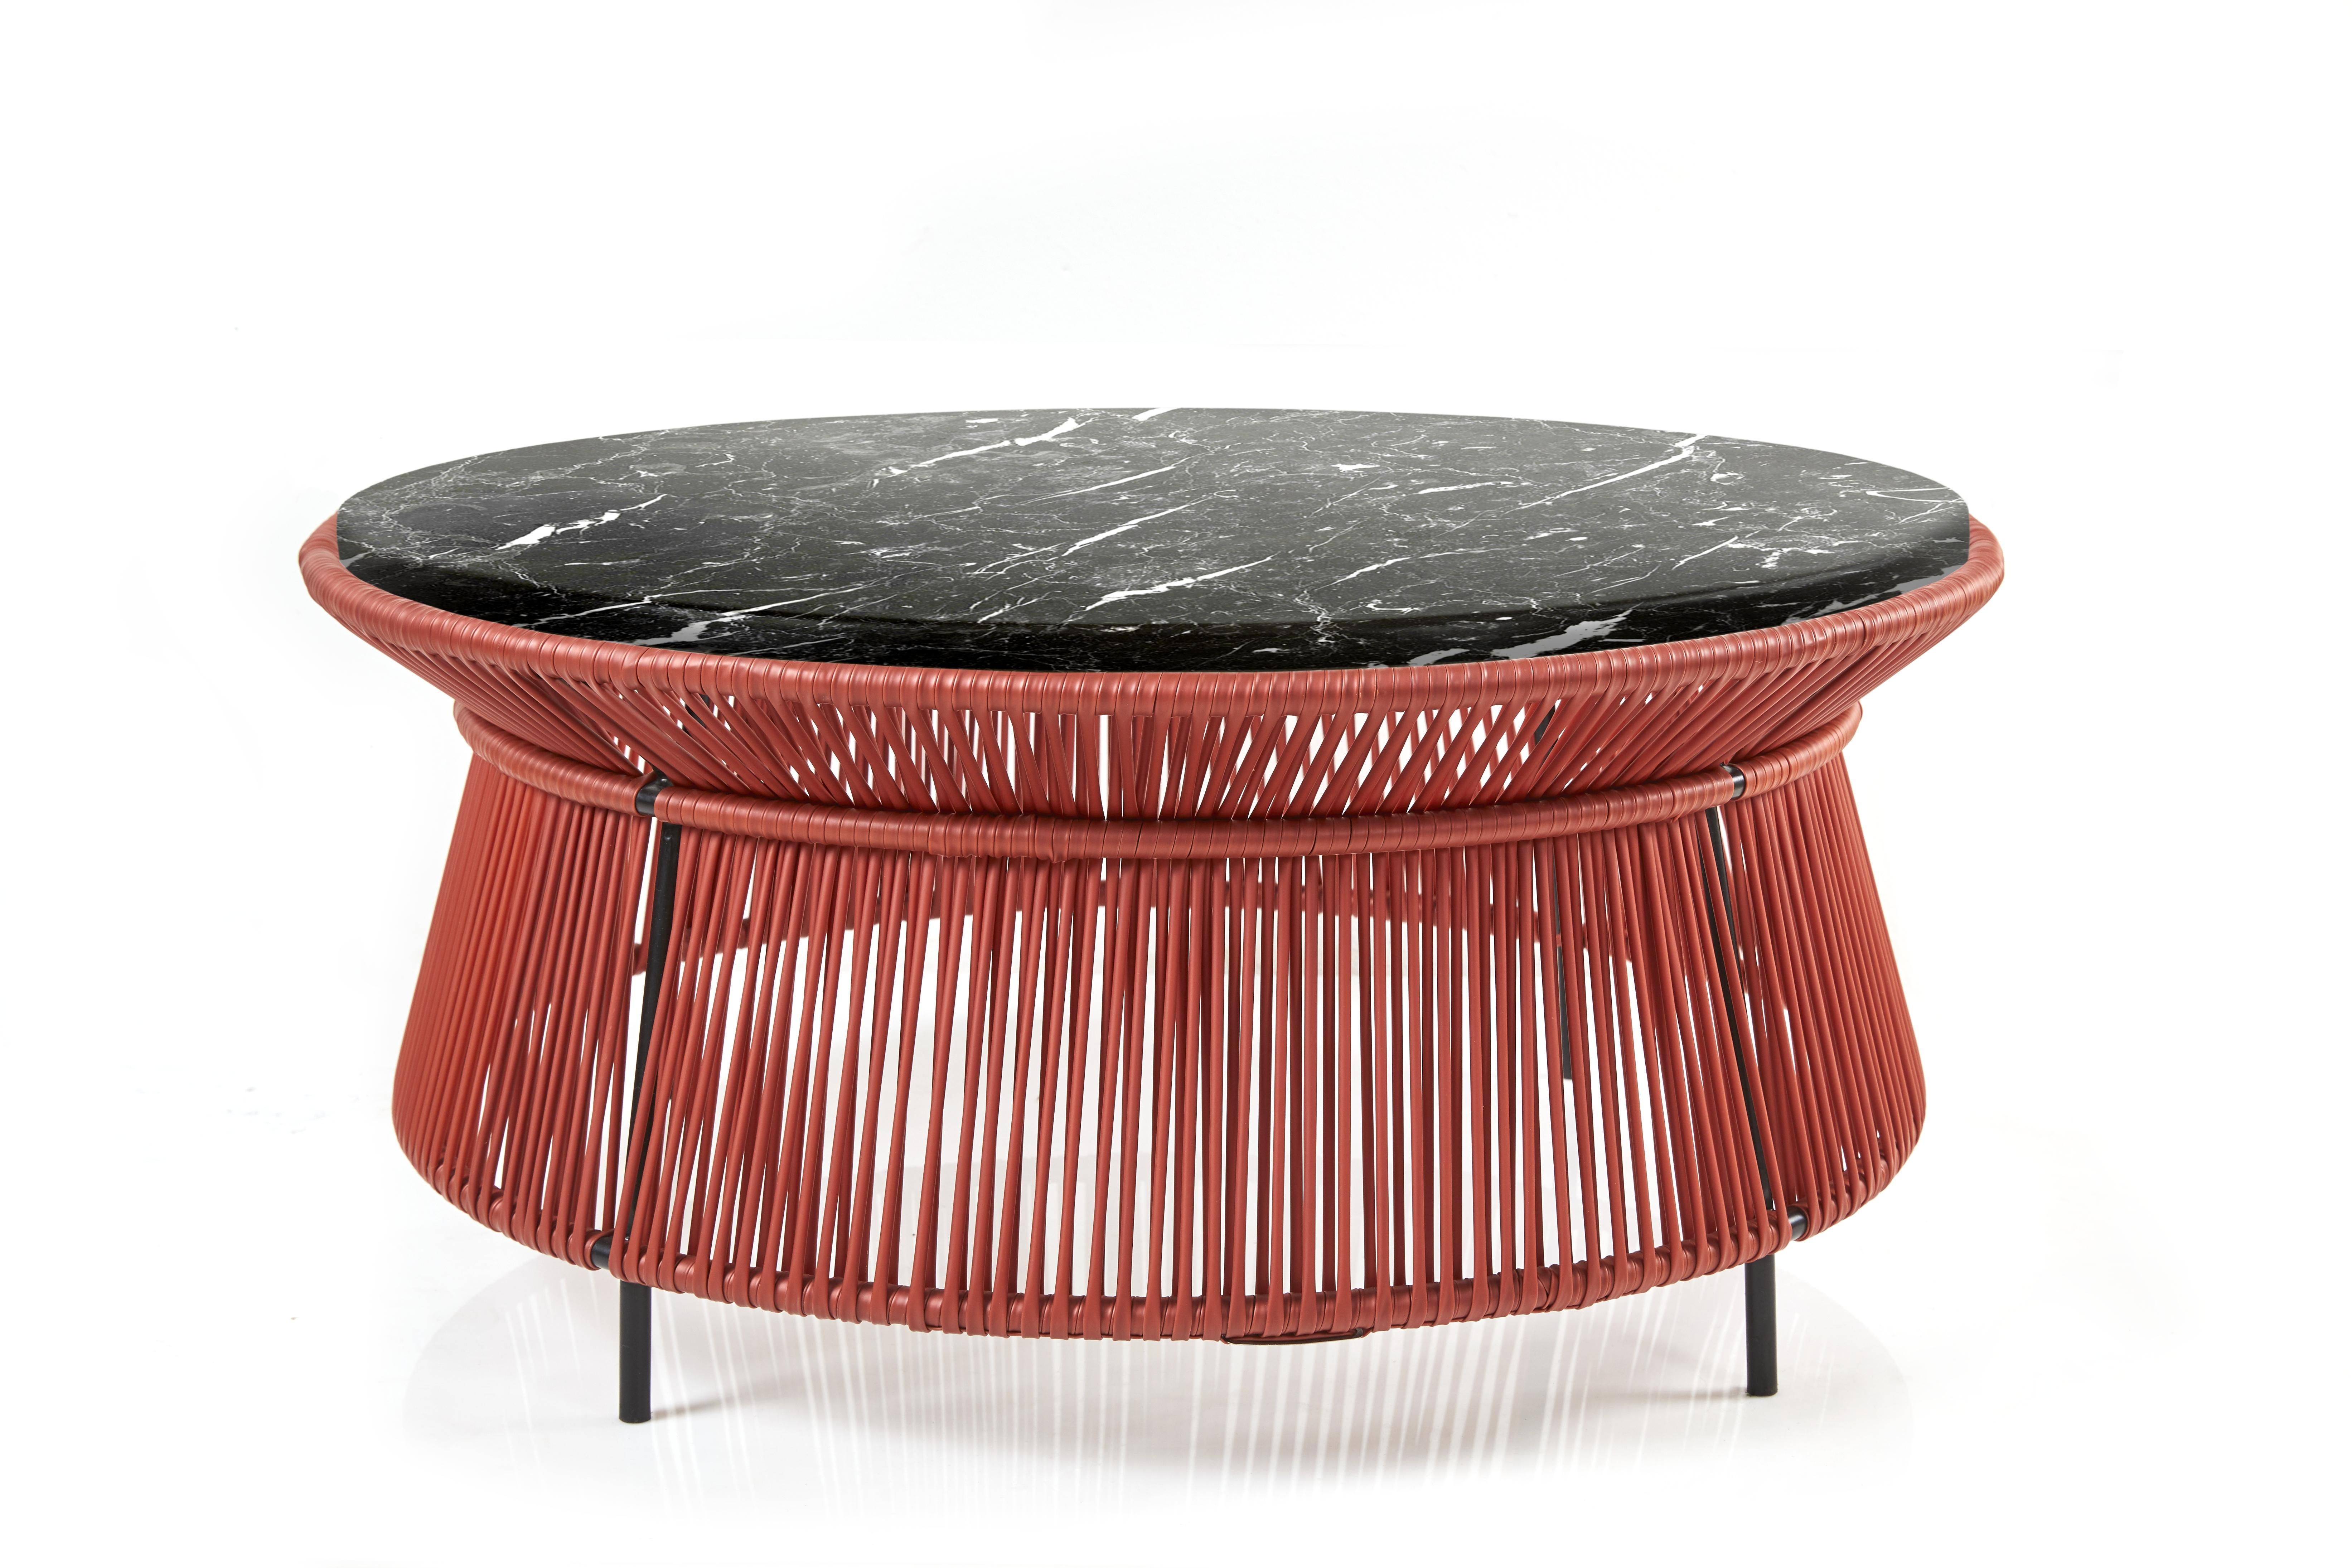 Marble Top Caribe Chic low table by Sebastian Herkner
Materials: Galvanized and powder-coated tubular steel. PVC strings are made from recycled plastic.
Technique: Made from recycled plastic and weaved by local craftspeople in Colombia.